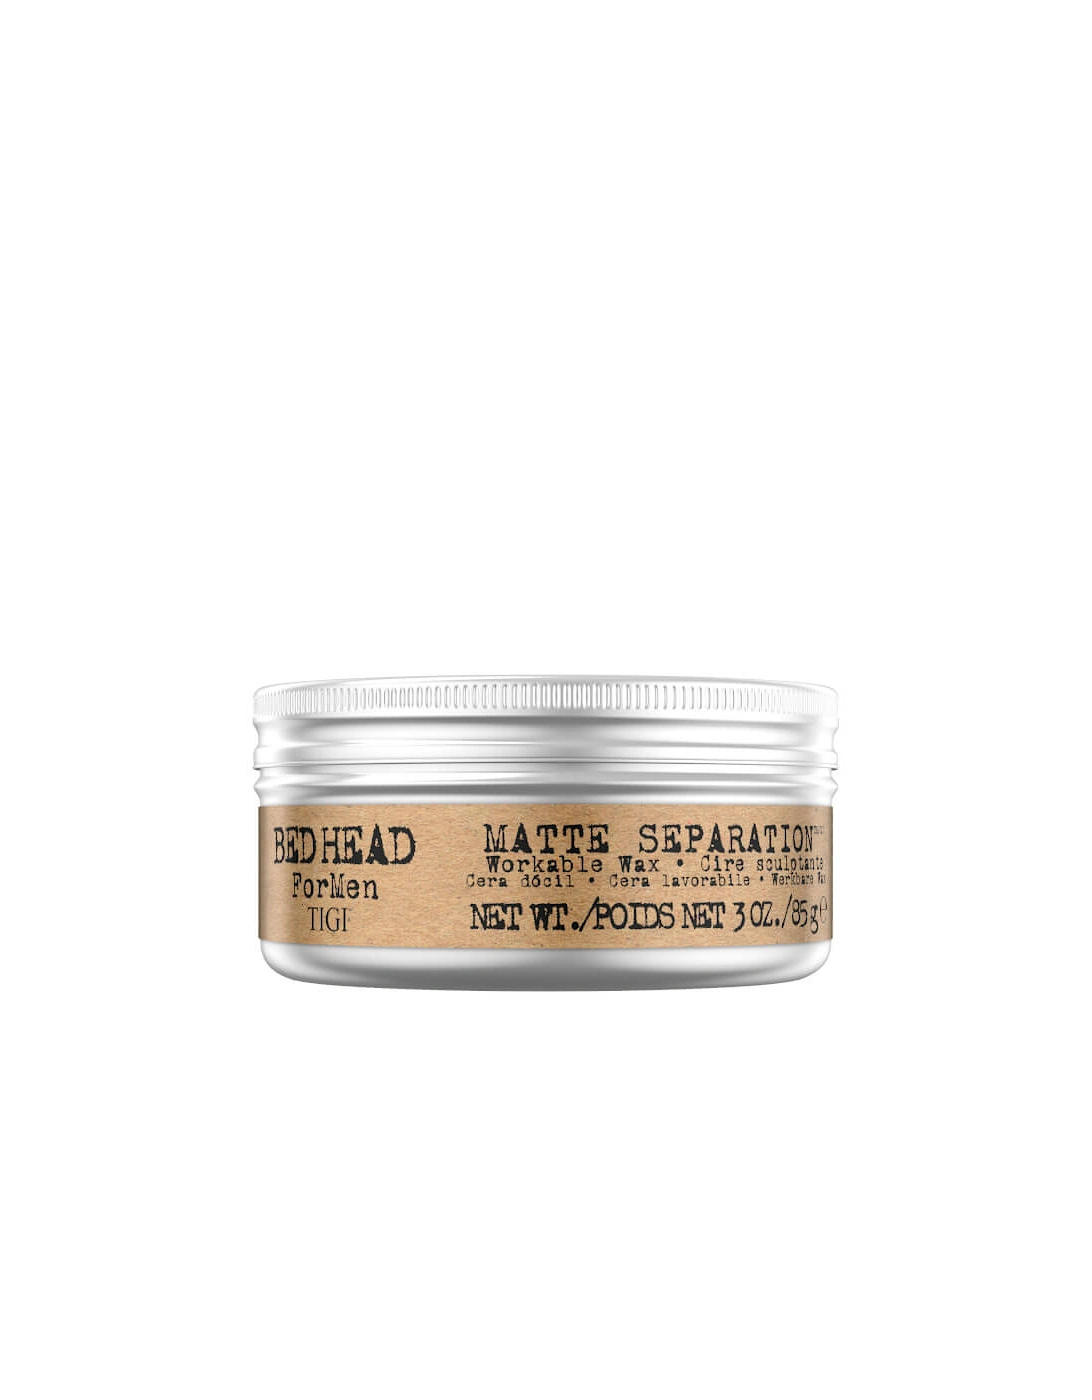 Bed Head for Men Matte Separation Workable Wax (85g) - - Bed Head for Men Matte Separation Workable Wax (85g) - Mario, 2 of 1